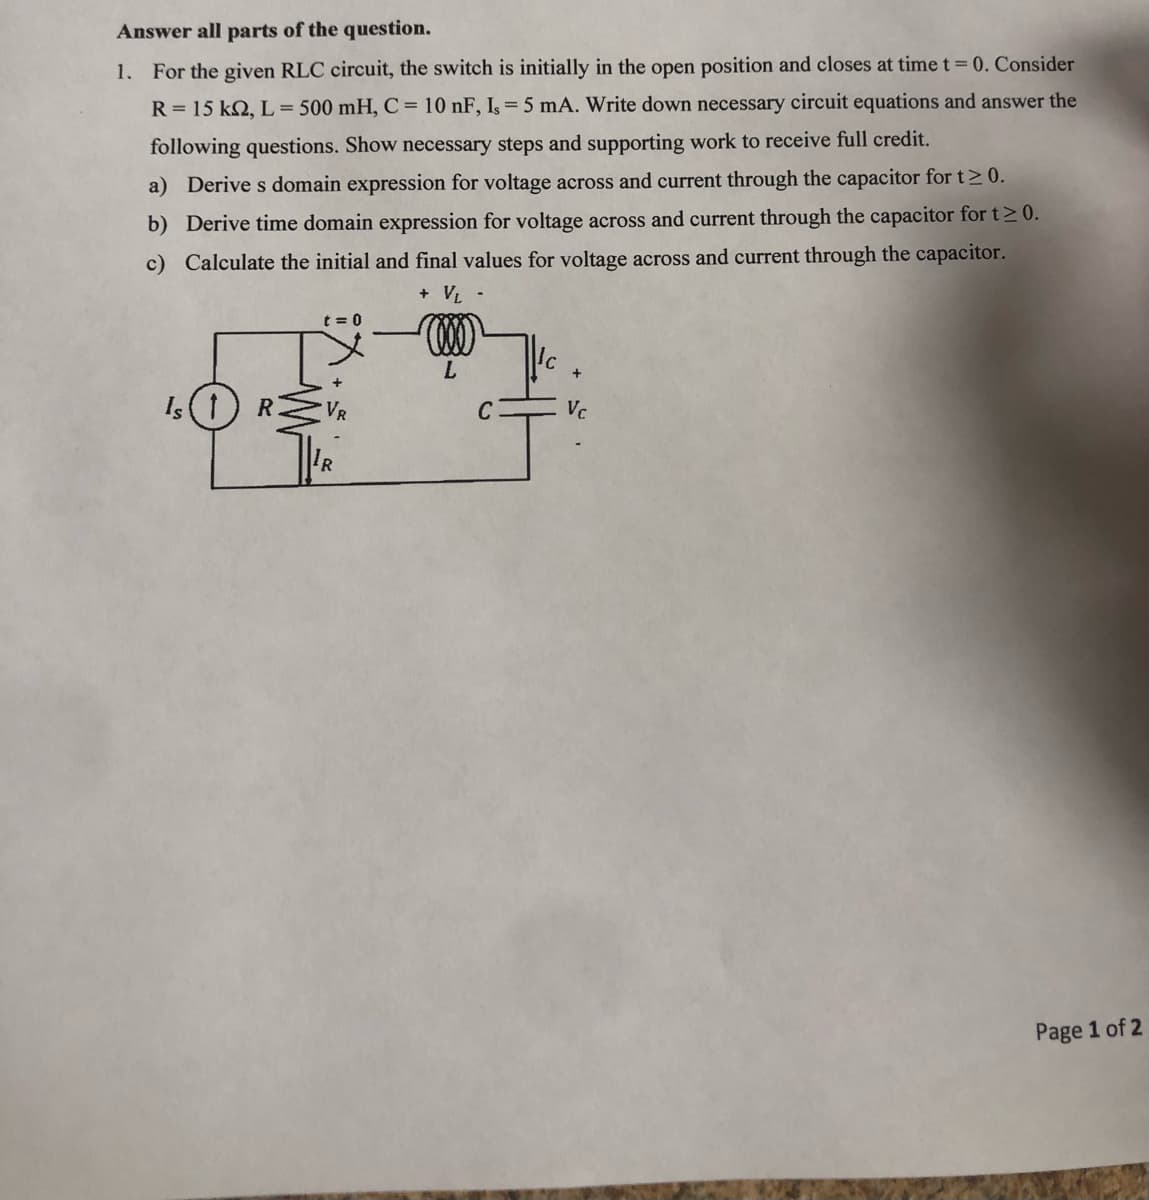 Answer all parts of the question.
1. For the given RLC circuit, the switch is initially in the open position and closes at time t = 0. Consider
R = 15 k2, L = 500 mH, C = 10 nF, Is = 5 mA. Write down necessary circuit equations and answer the
following questions. Show necessary steps and supporting work to receive full credit.
a) Derive s domain expression for voltage across and current through the capacitor for t≥ 0.
b) Derive time domain expression for voltage across and current through the capacitor for t≥ 0.
c) Calculate the initial and final values for voltage across and current through the capacitor.
+ VL -
Is (1) R
t=0
L
C
+
Vc
Page 1 of 2